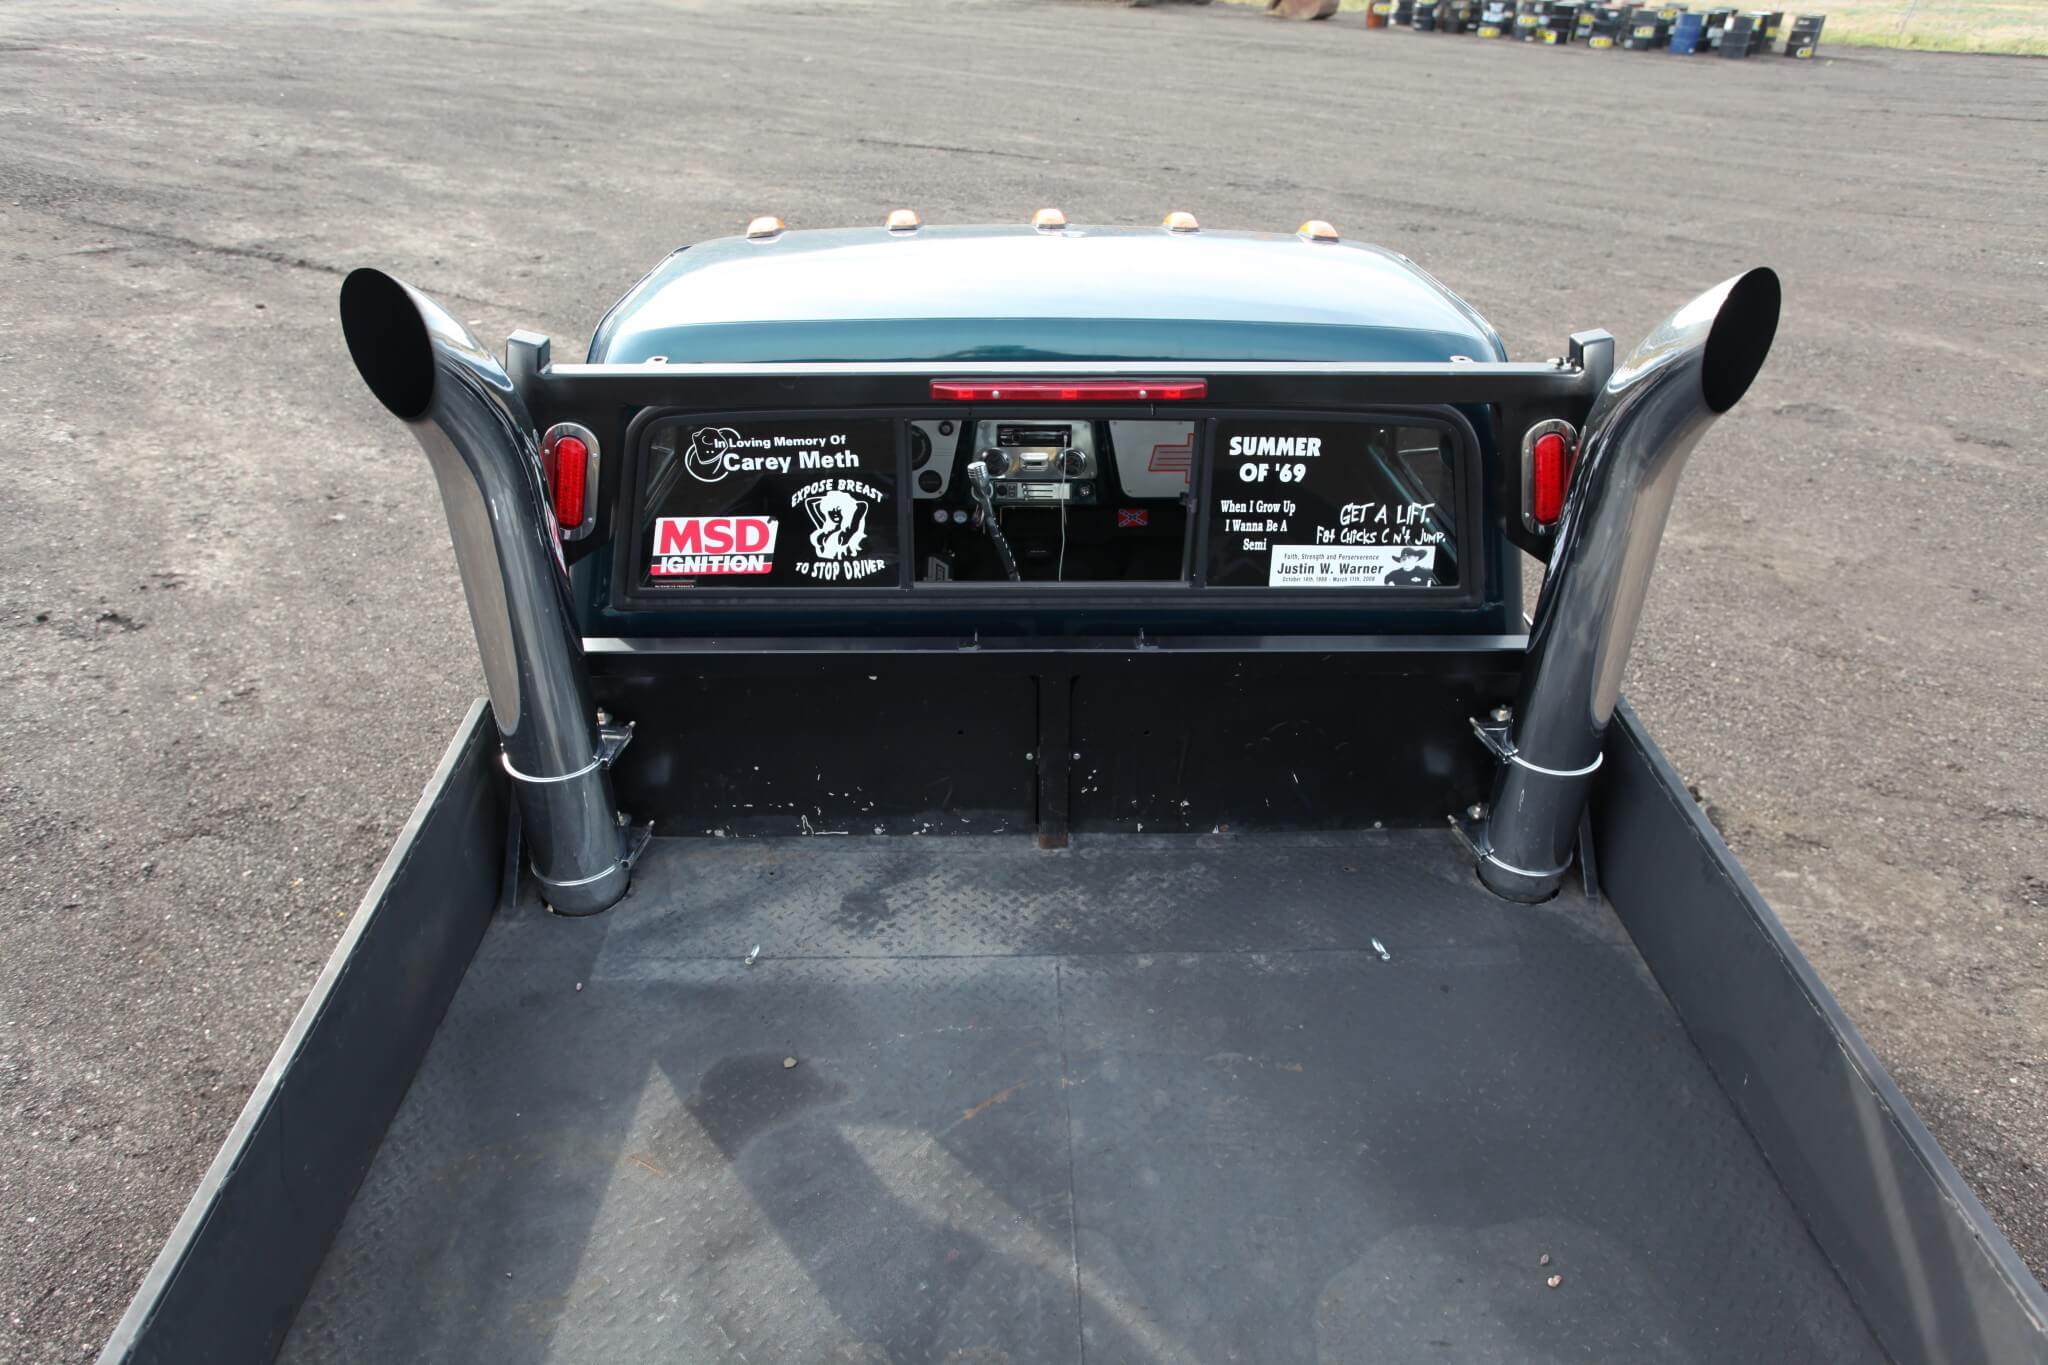 Two 6-inch vertical exhaust stacks exit through the flatbed floor.